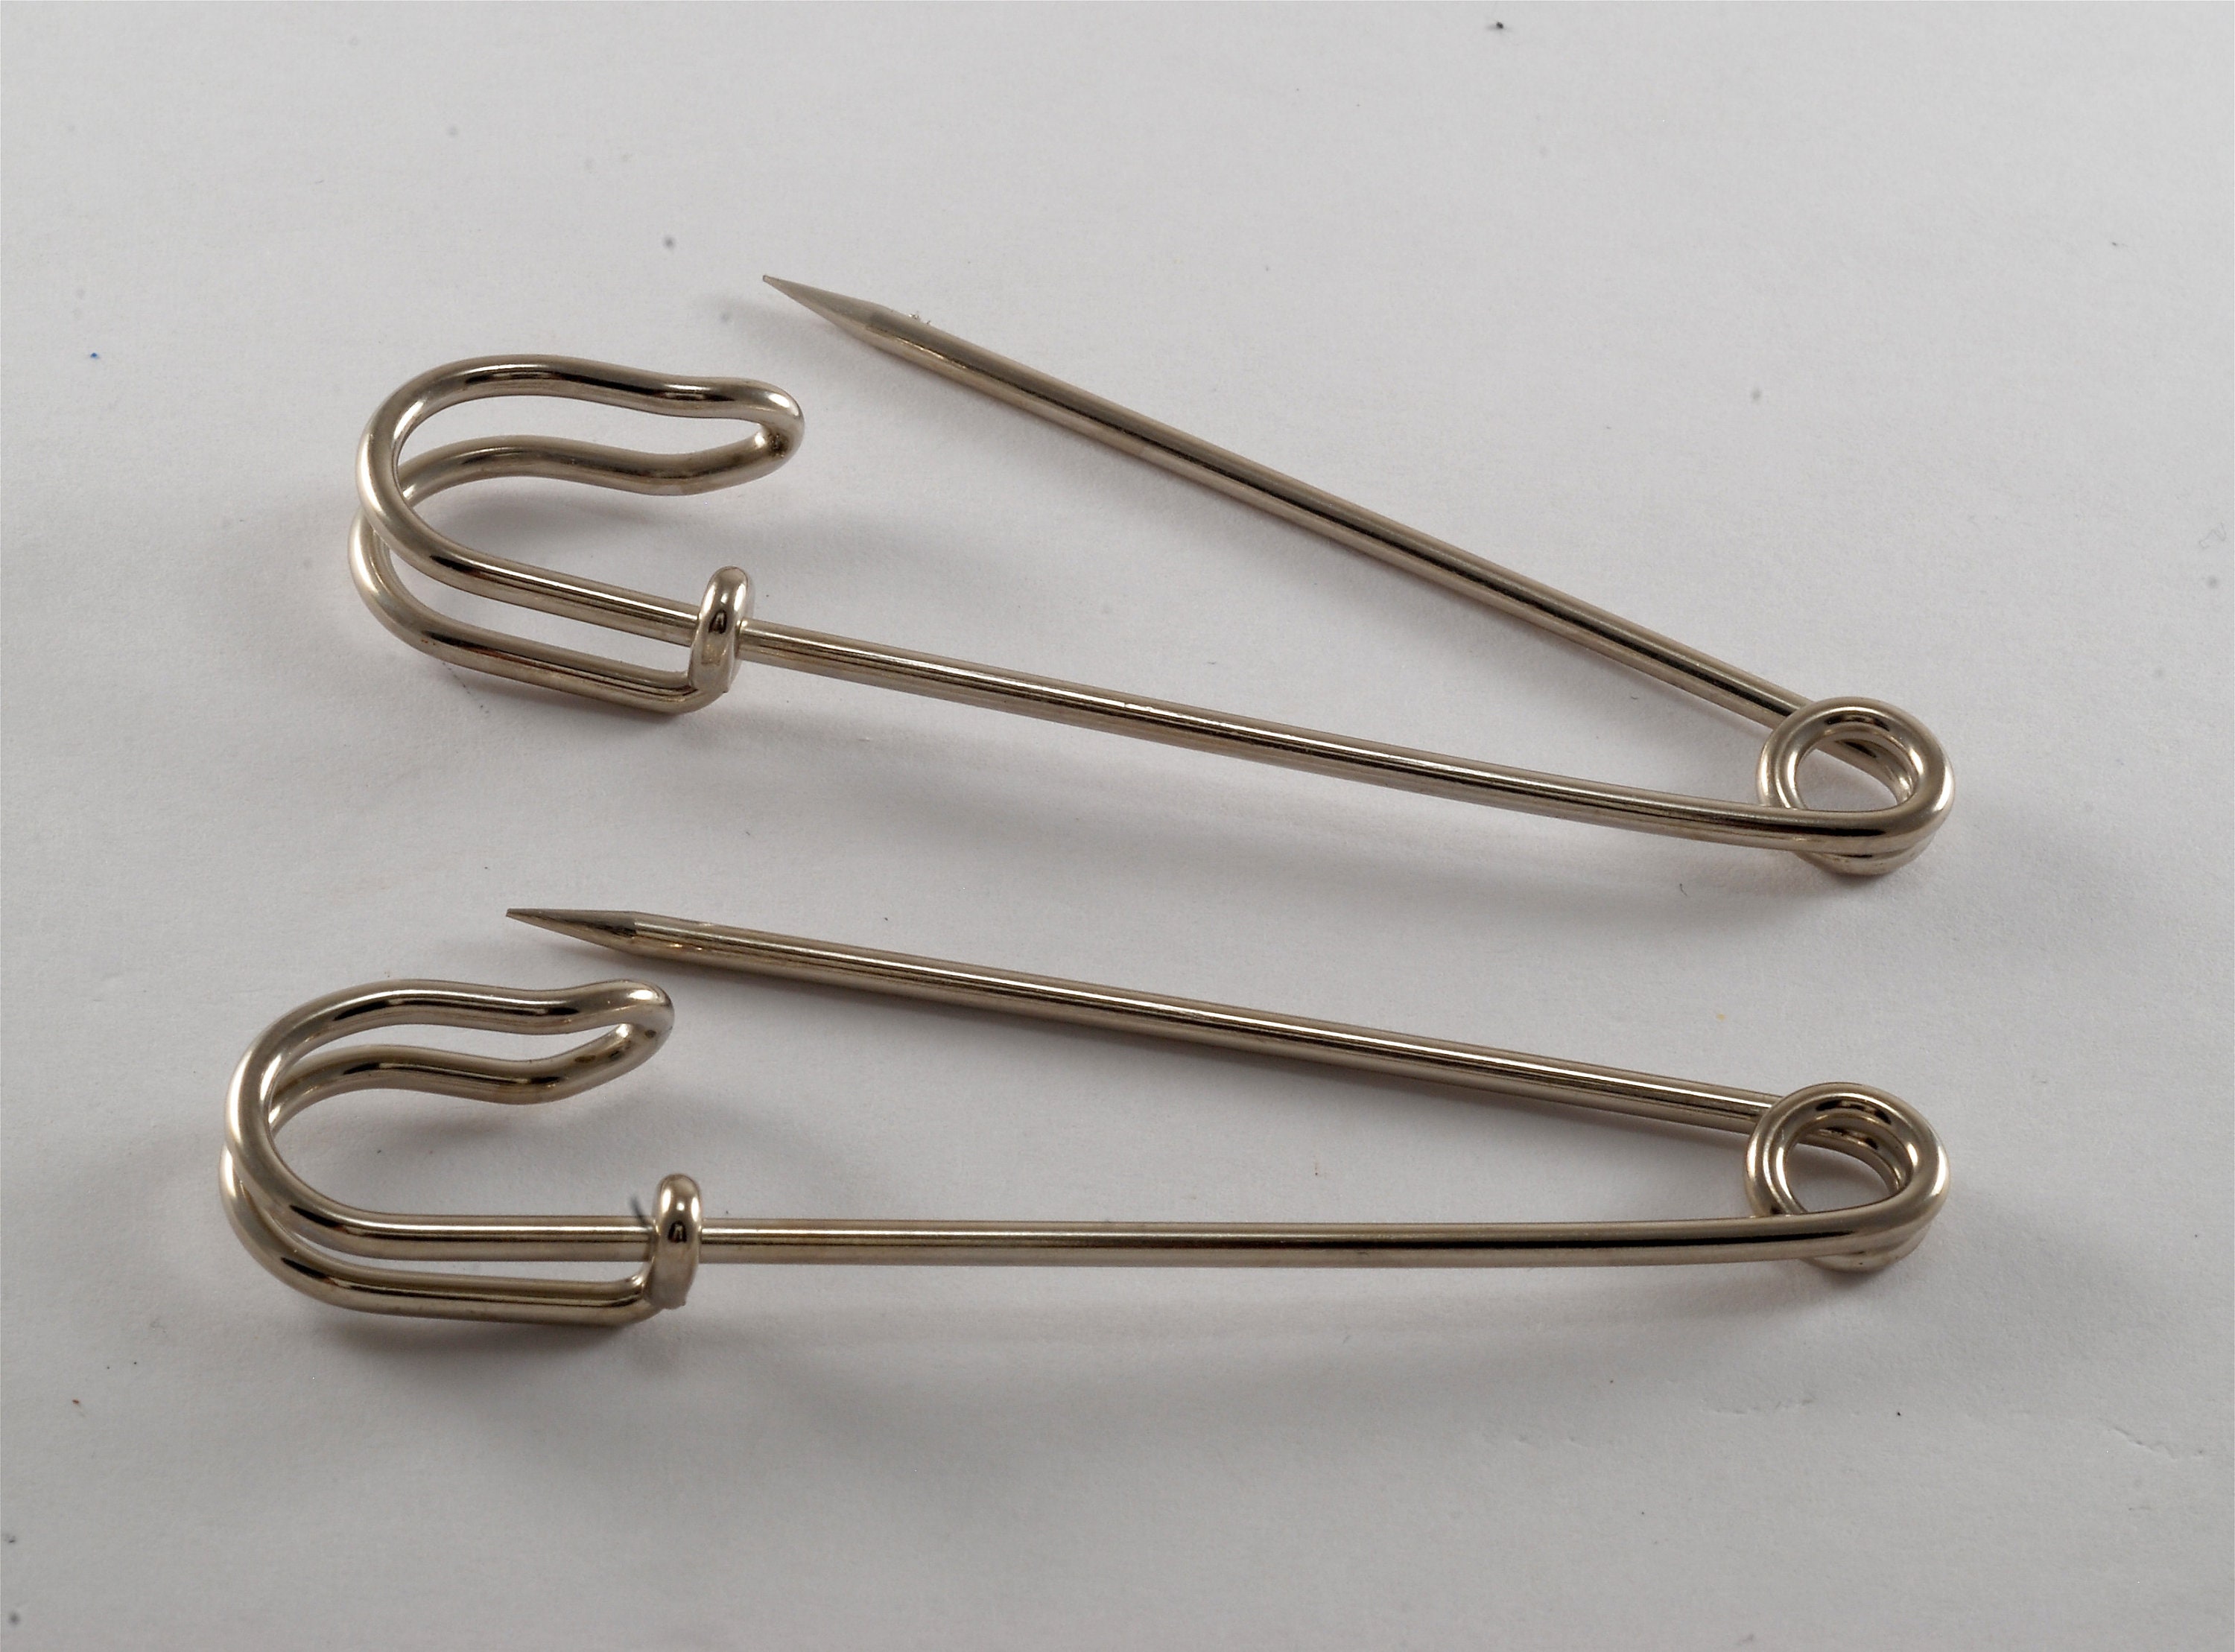 Large Safety Kilt Skirt Blanket Shawl Pins Silver and Gold